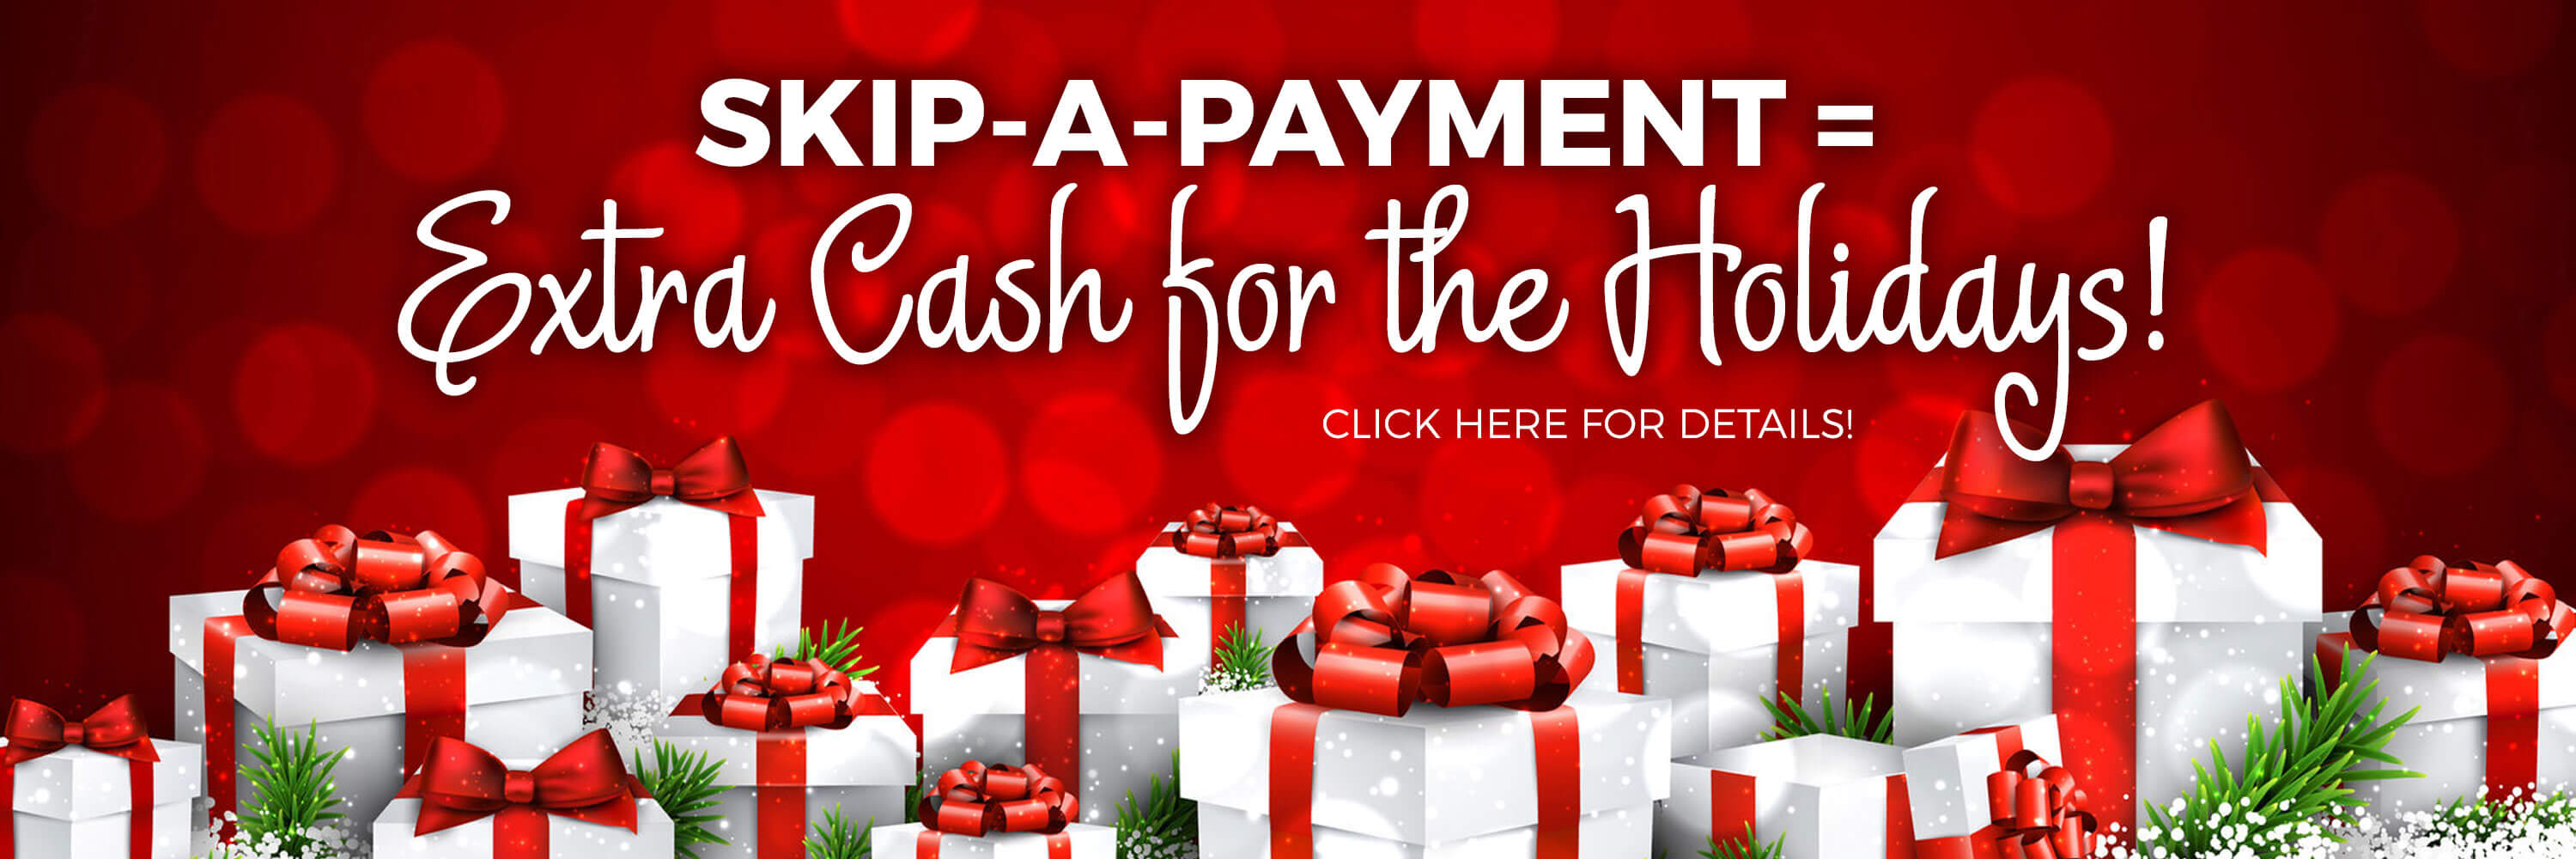 Skip-a-Payment Equals Extra Cash for the Holidays!